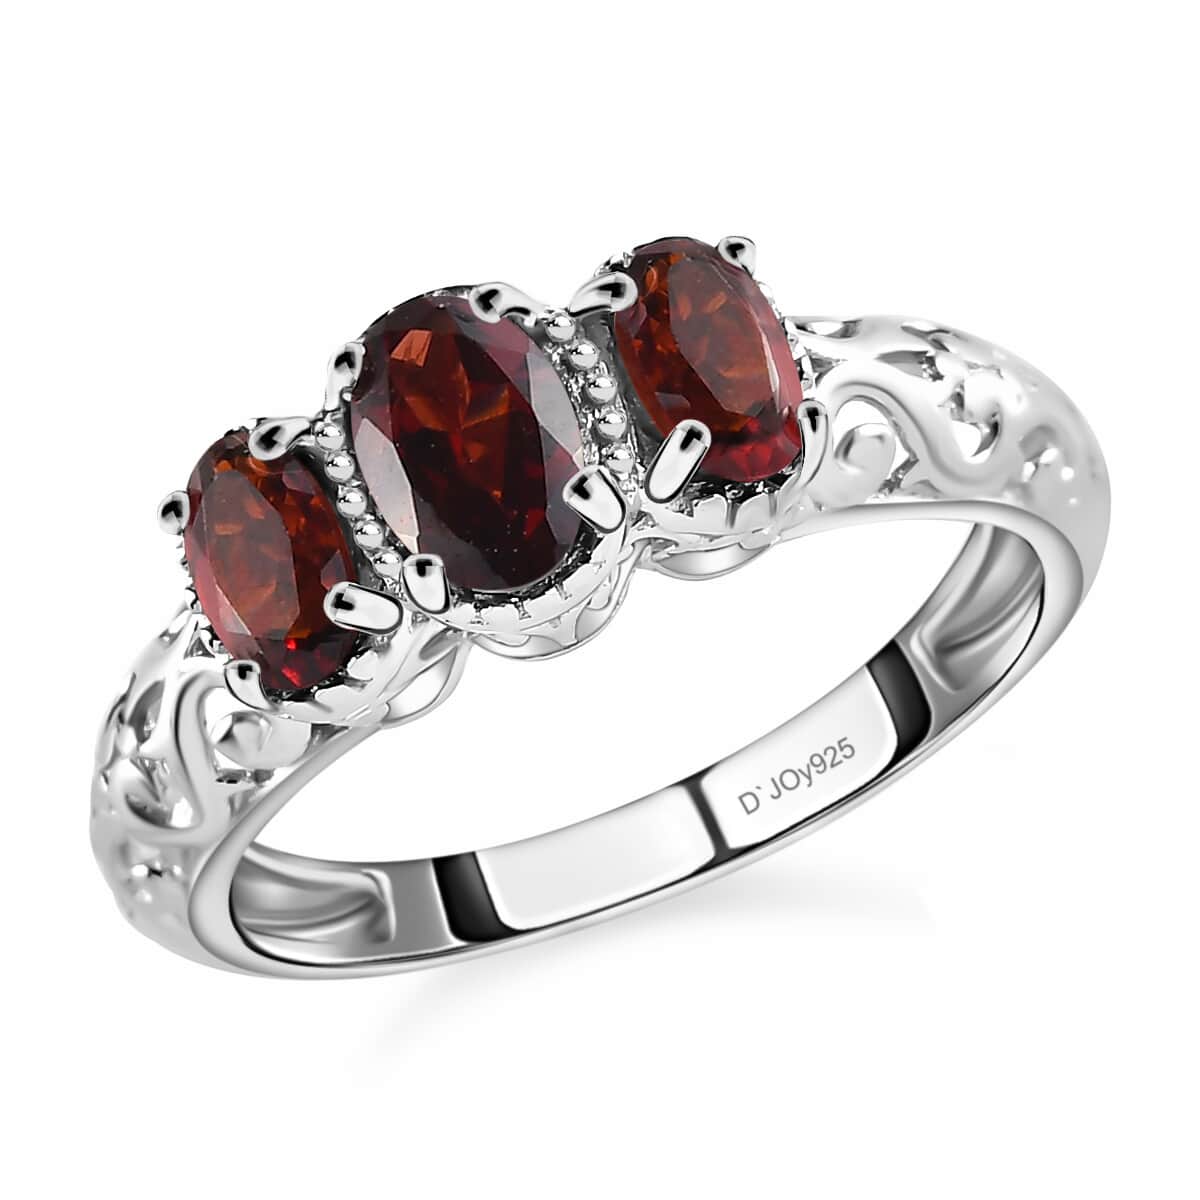 Garnet Ring, 3 Stone Garnet Ring, Trilogy Ring, Sterling Silver Ring, Birthstone Jewelry, Mozambique Garnet 3 Stone Ring 1.15 ctw (Size 5.0) image number 0